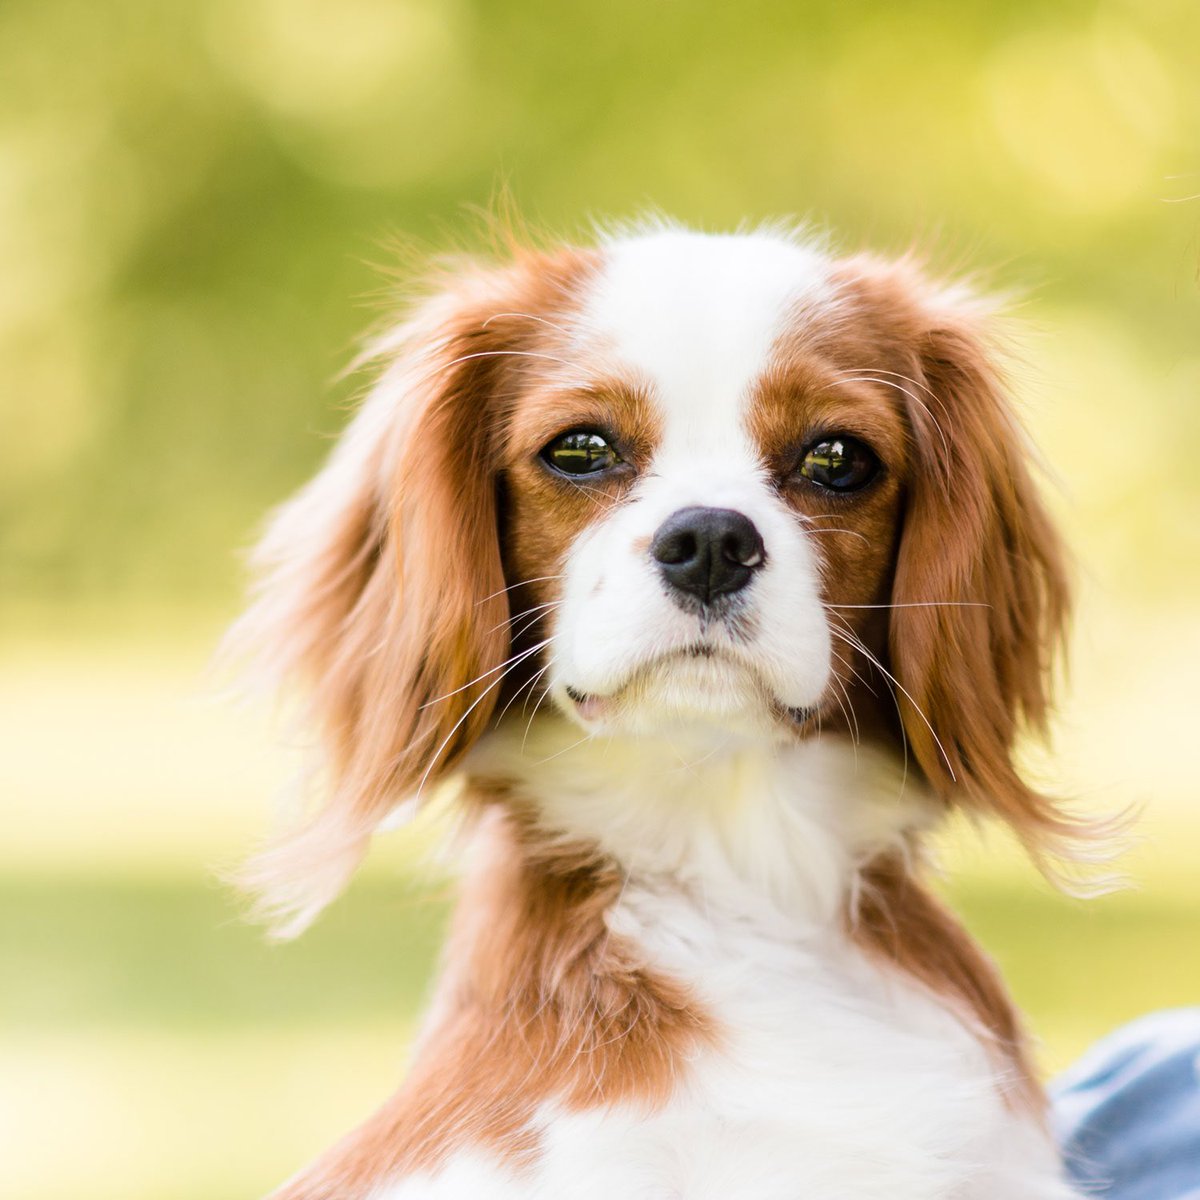 Palliative -> Cavalier King Charles Spaniel The original comforter dog. Knows when you need an affectionate touch. Very easygoing and sweet, but stubborn when called for. Never found far from people, nearly everyone is fond of them.